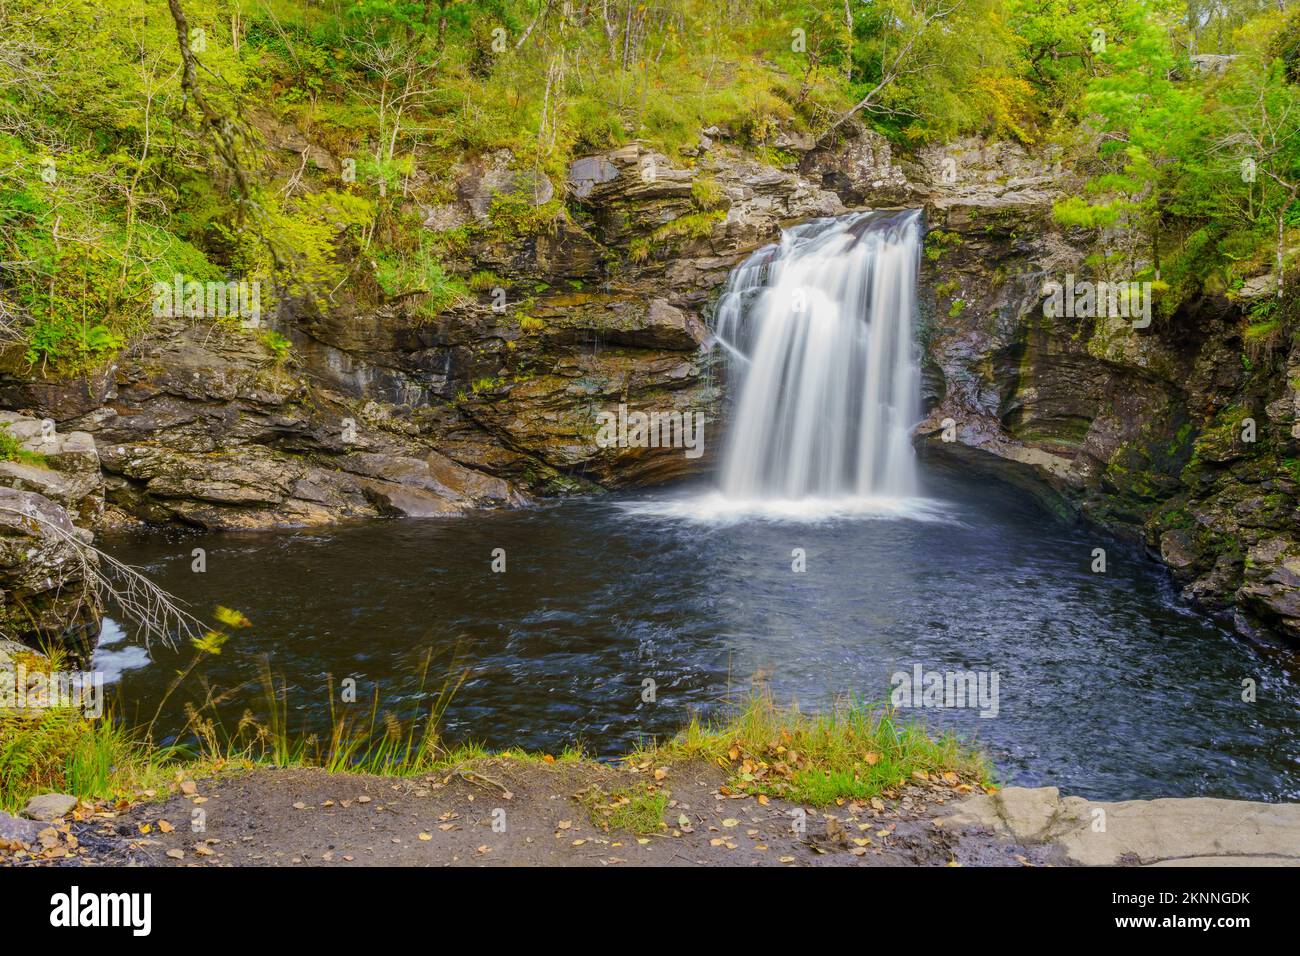 View of the Falls of Falloch, waterfall in Loch Lomond and the Trossachs National Park, Scotland, UK Stock Photo